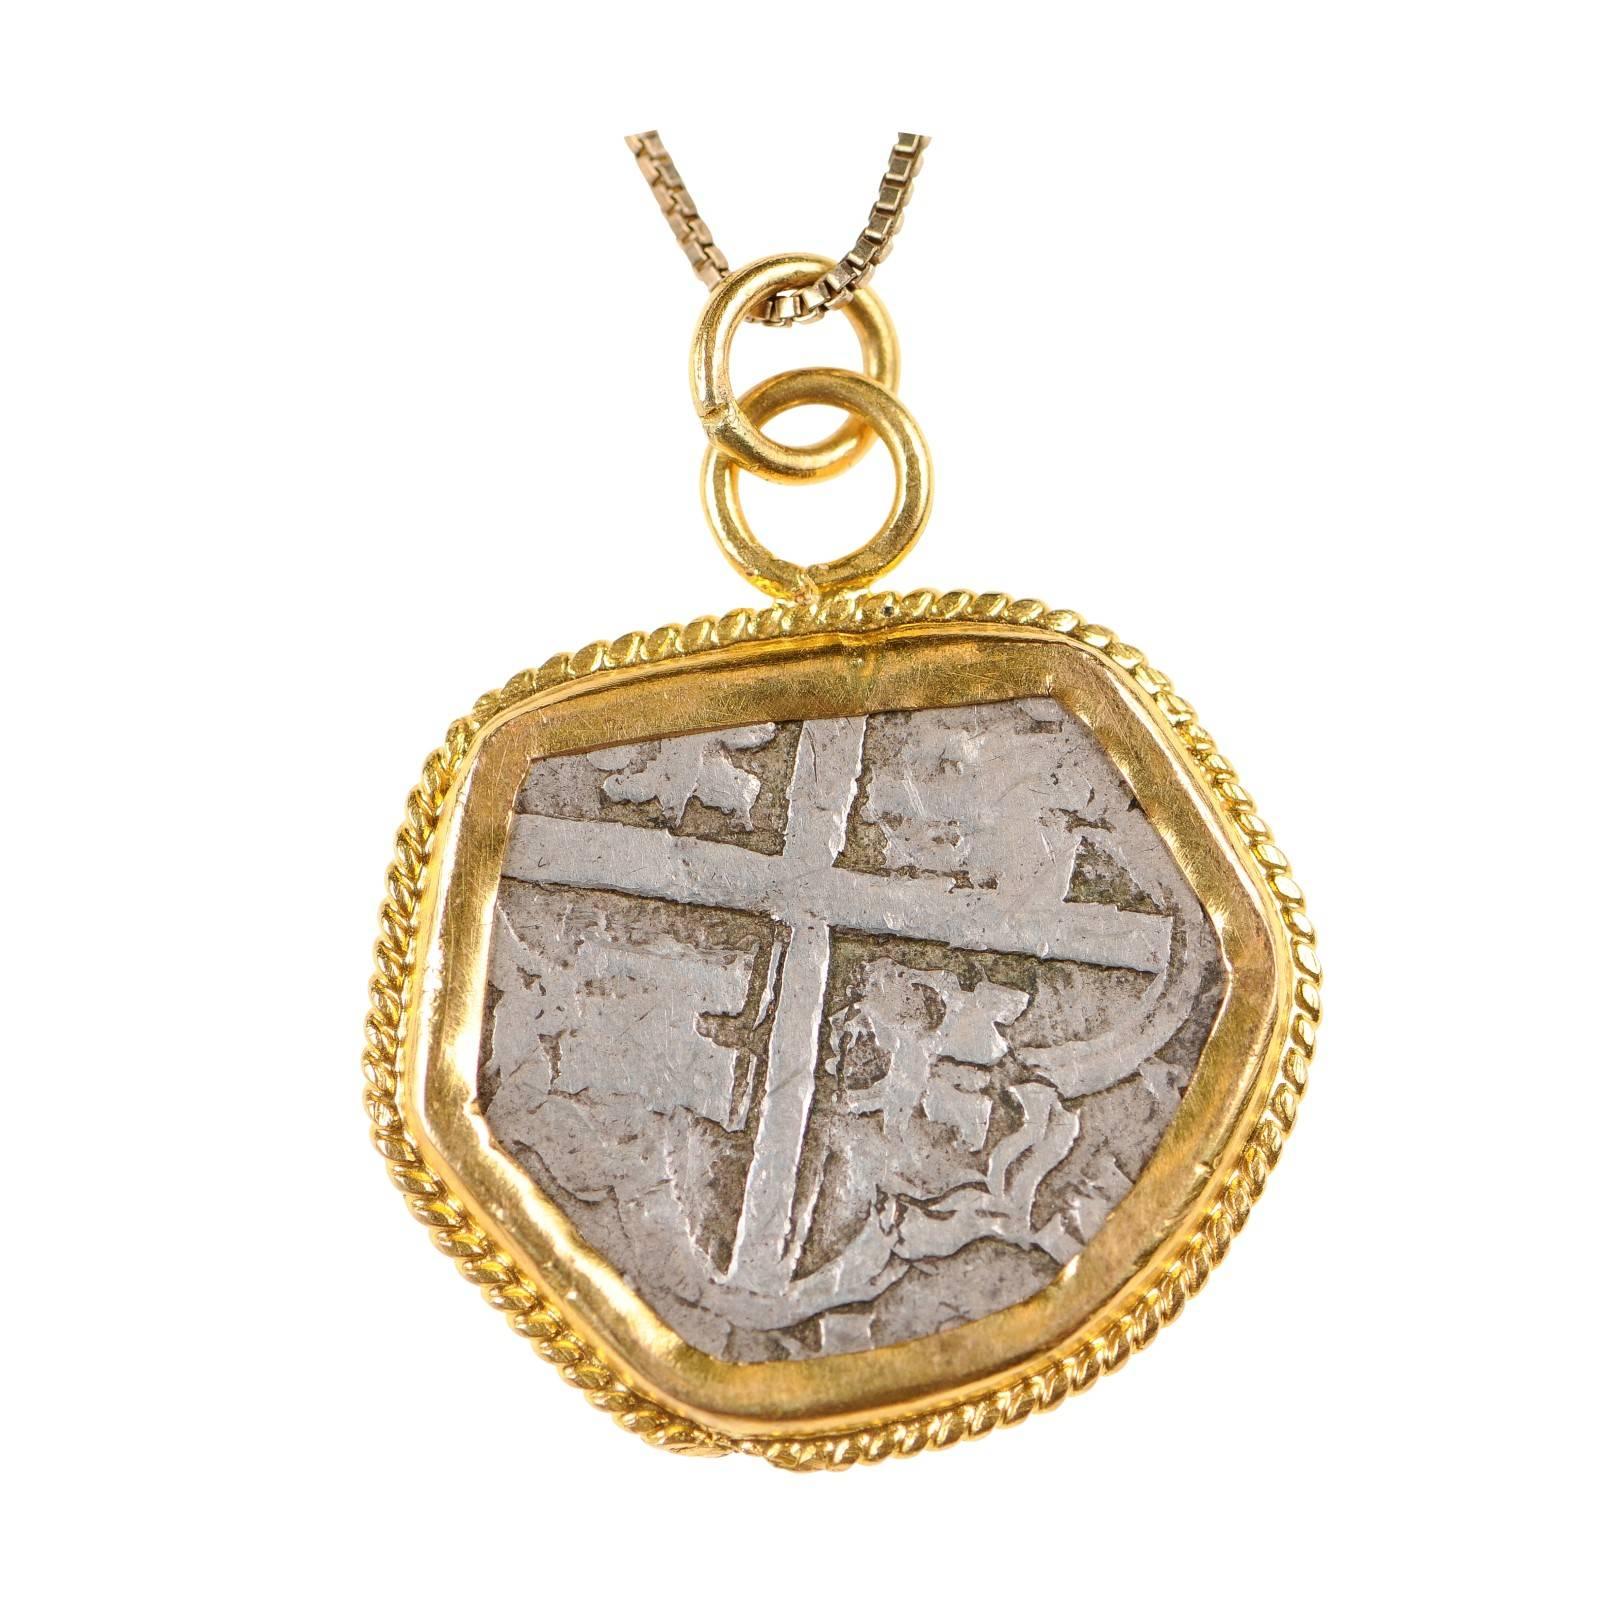 Spanish Silver Cob Coin circa 1500s Set in Rope Accented 22 Karat Gold Bezel For Sale